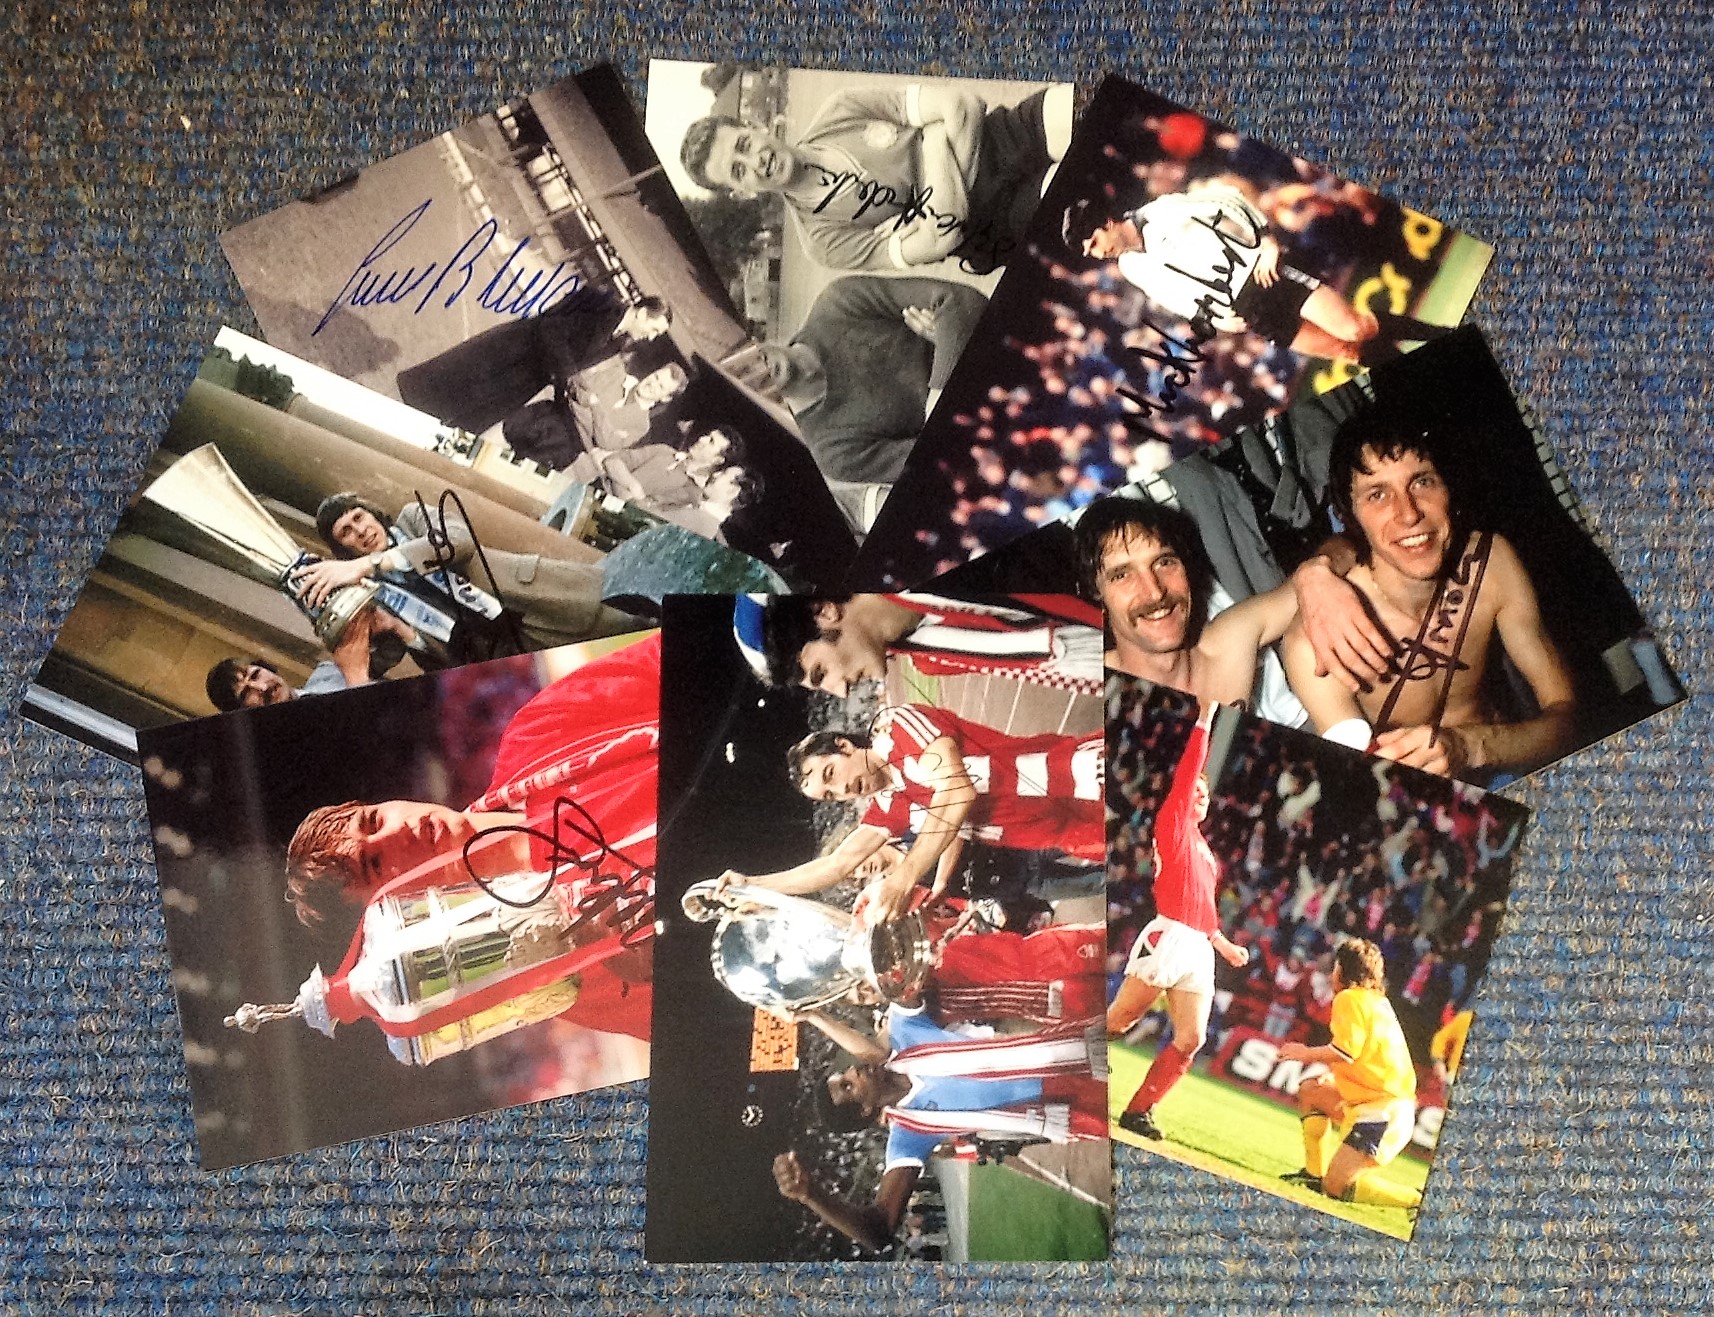 Football collection 8 6x4 colour and b/w photos signed by Frank Clark , Nigel Clough, Nigel